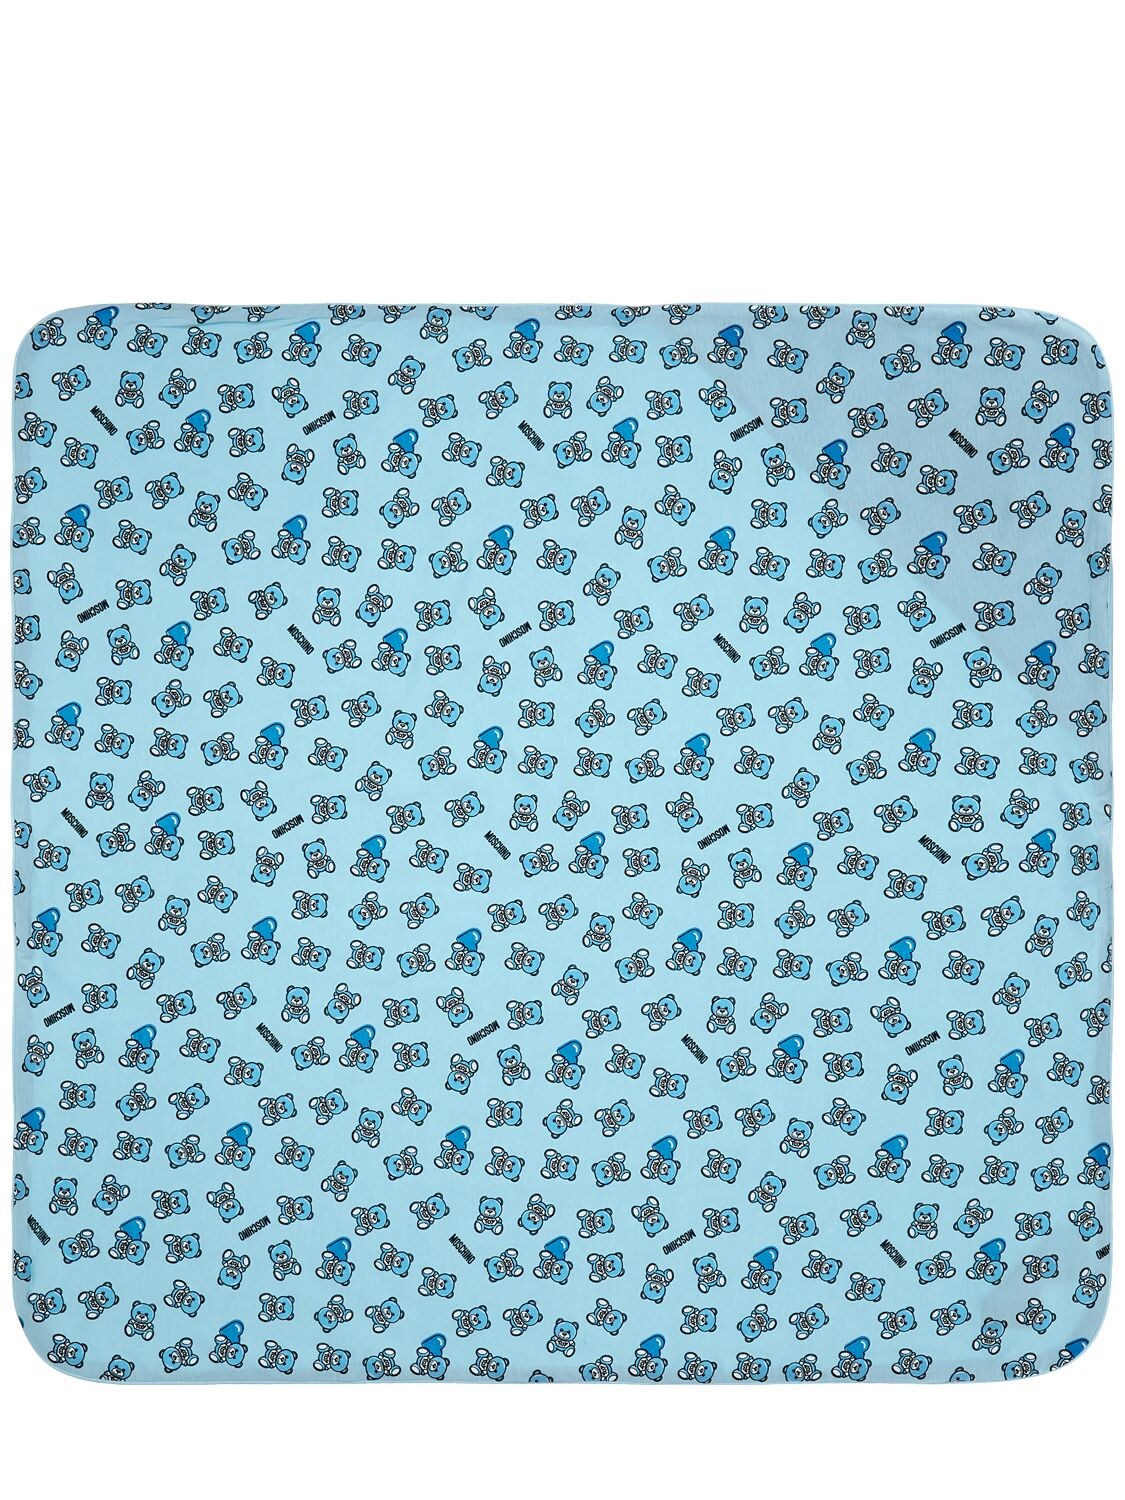 Moschino Toy Print Cotton Jersey Blanket In Light Blue